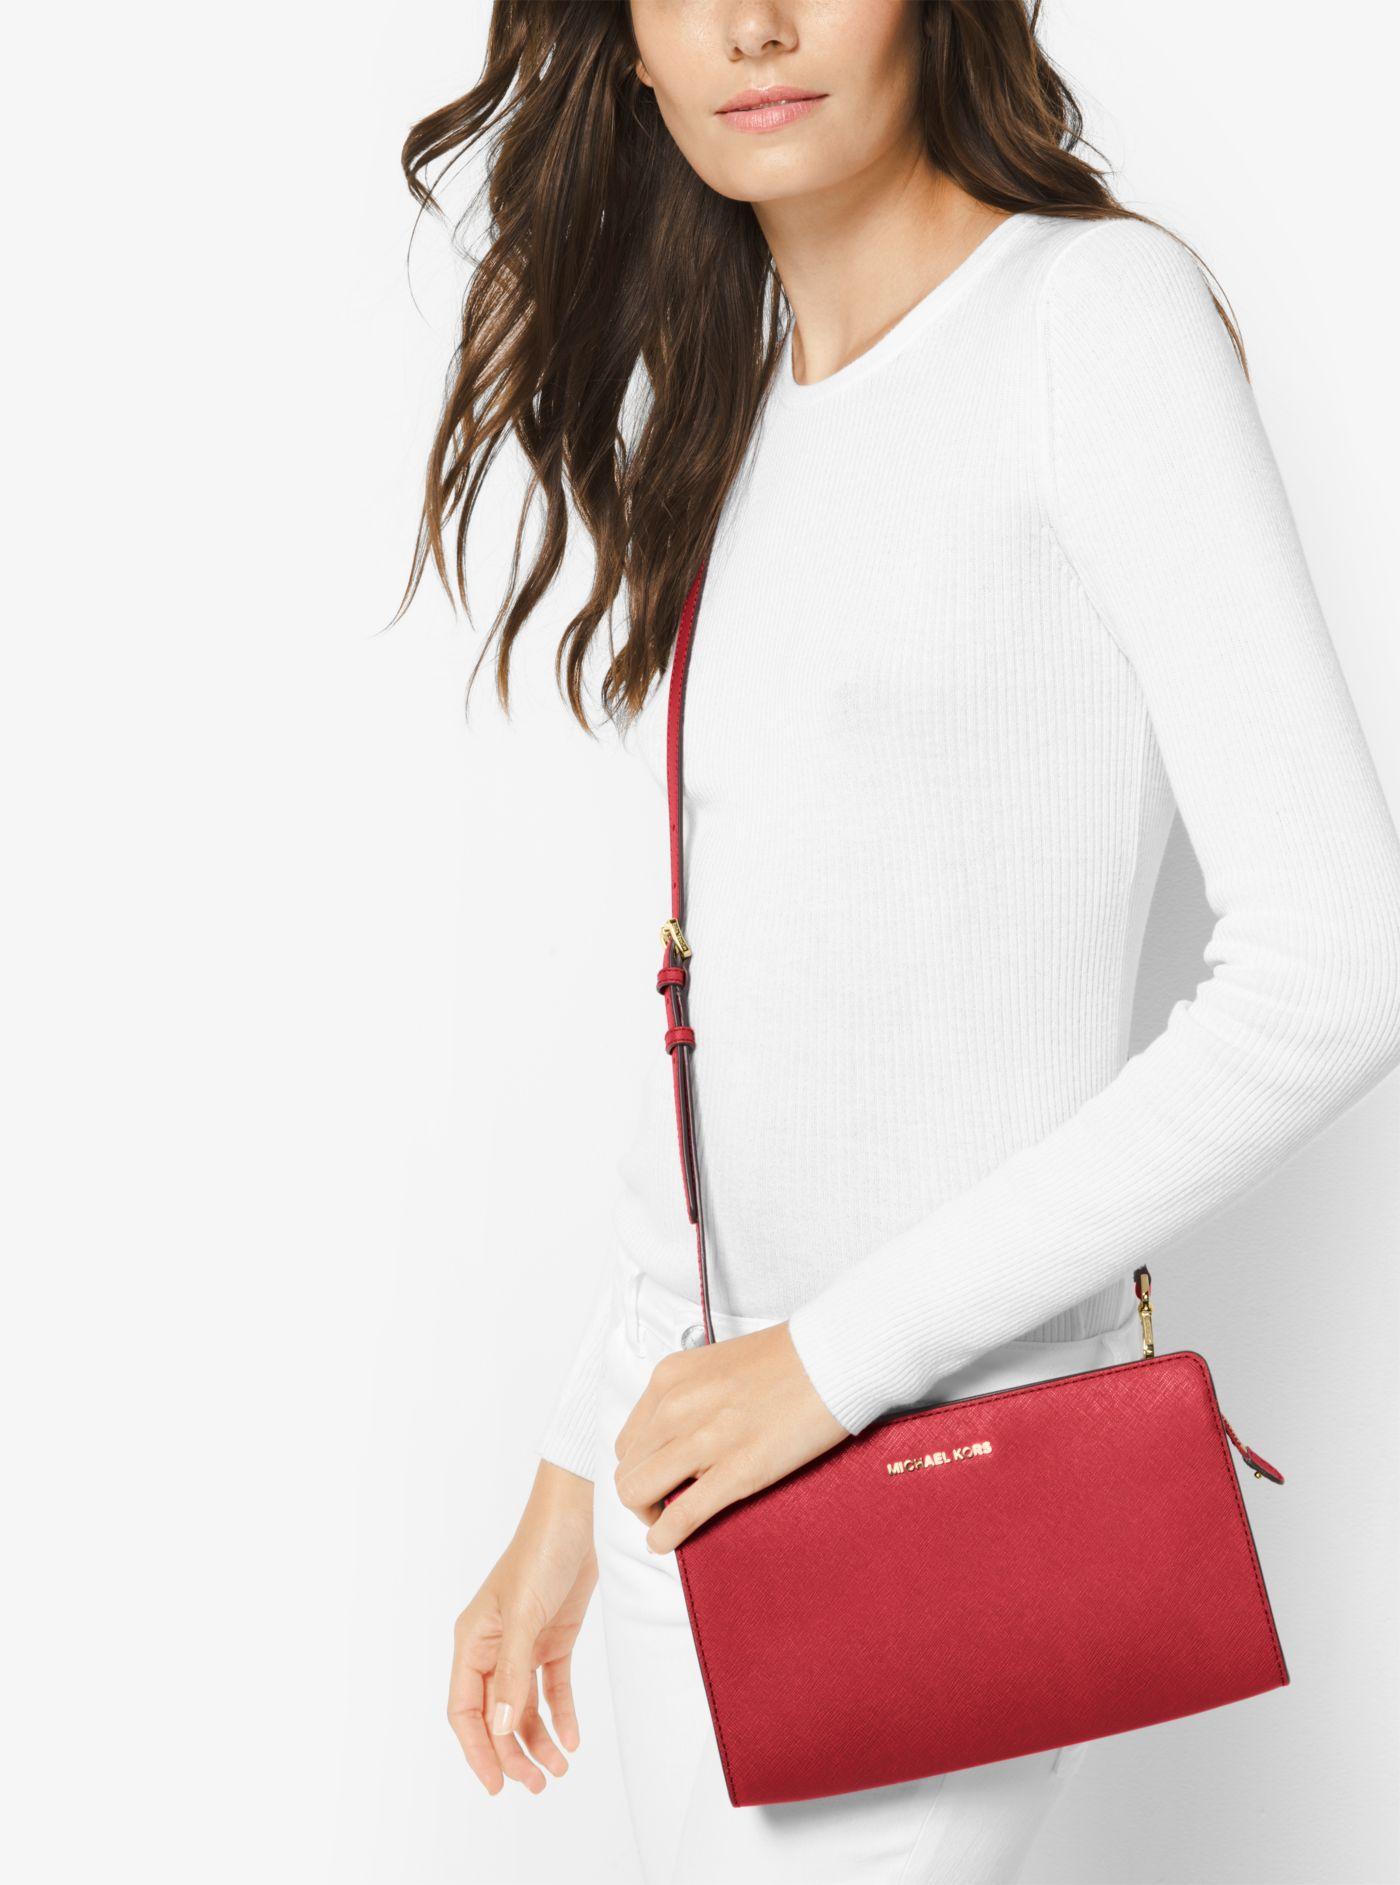 Michael Kors Jet Set Large Saffiano Leather Convertible Crossbody Bag in  Bright Red (Red) - Lyst